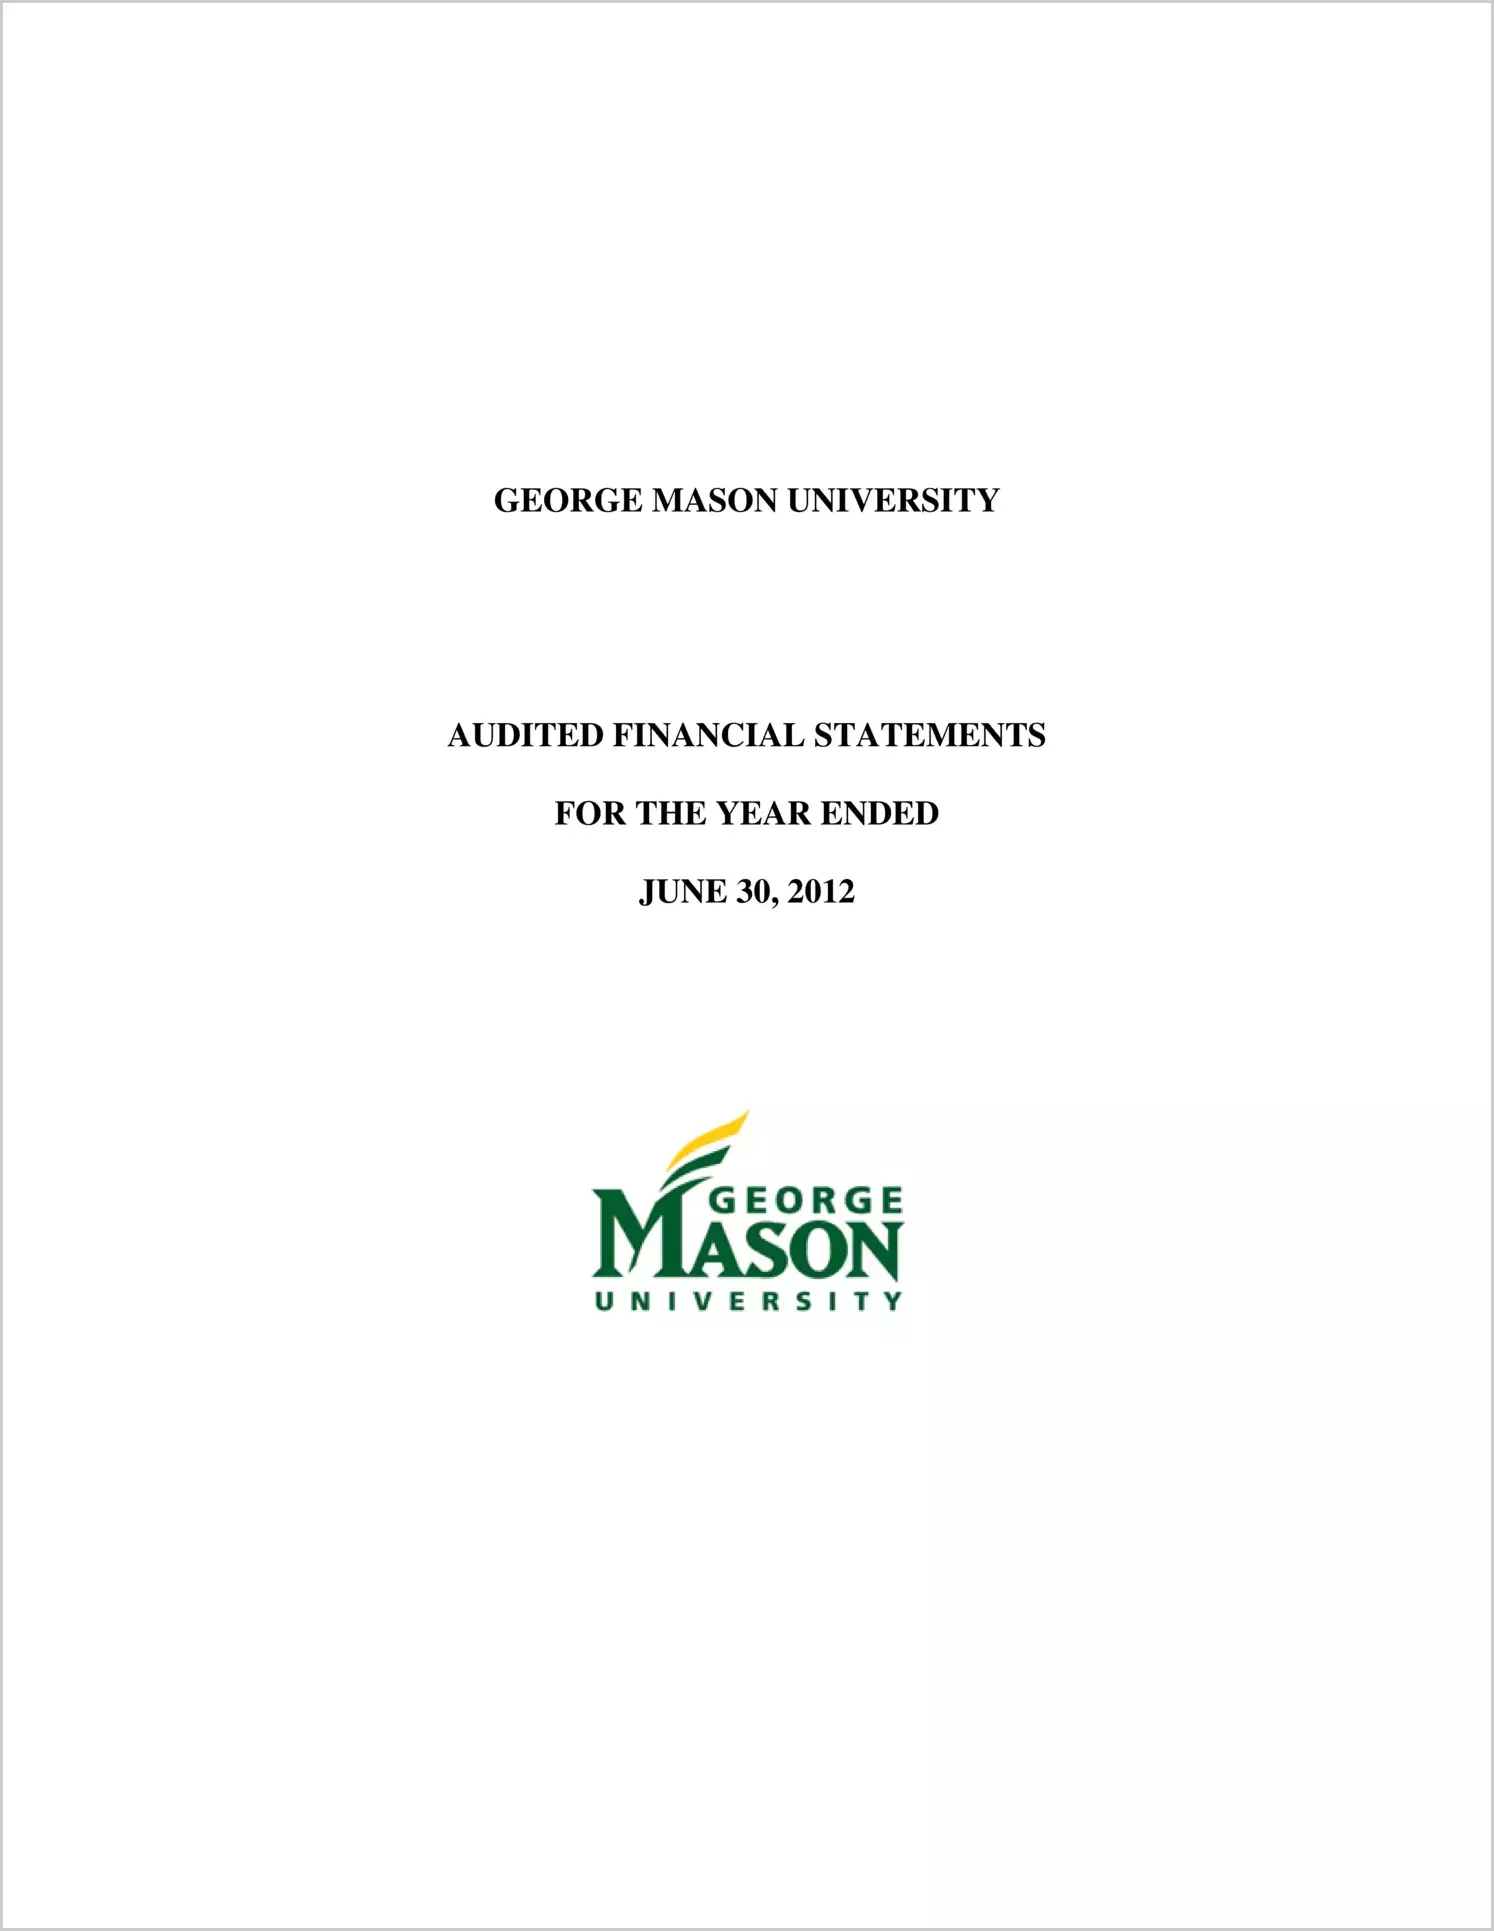 George Mason University Financial Statements for the year ended June 30, 2012